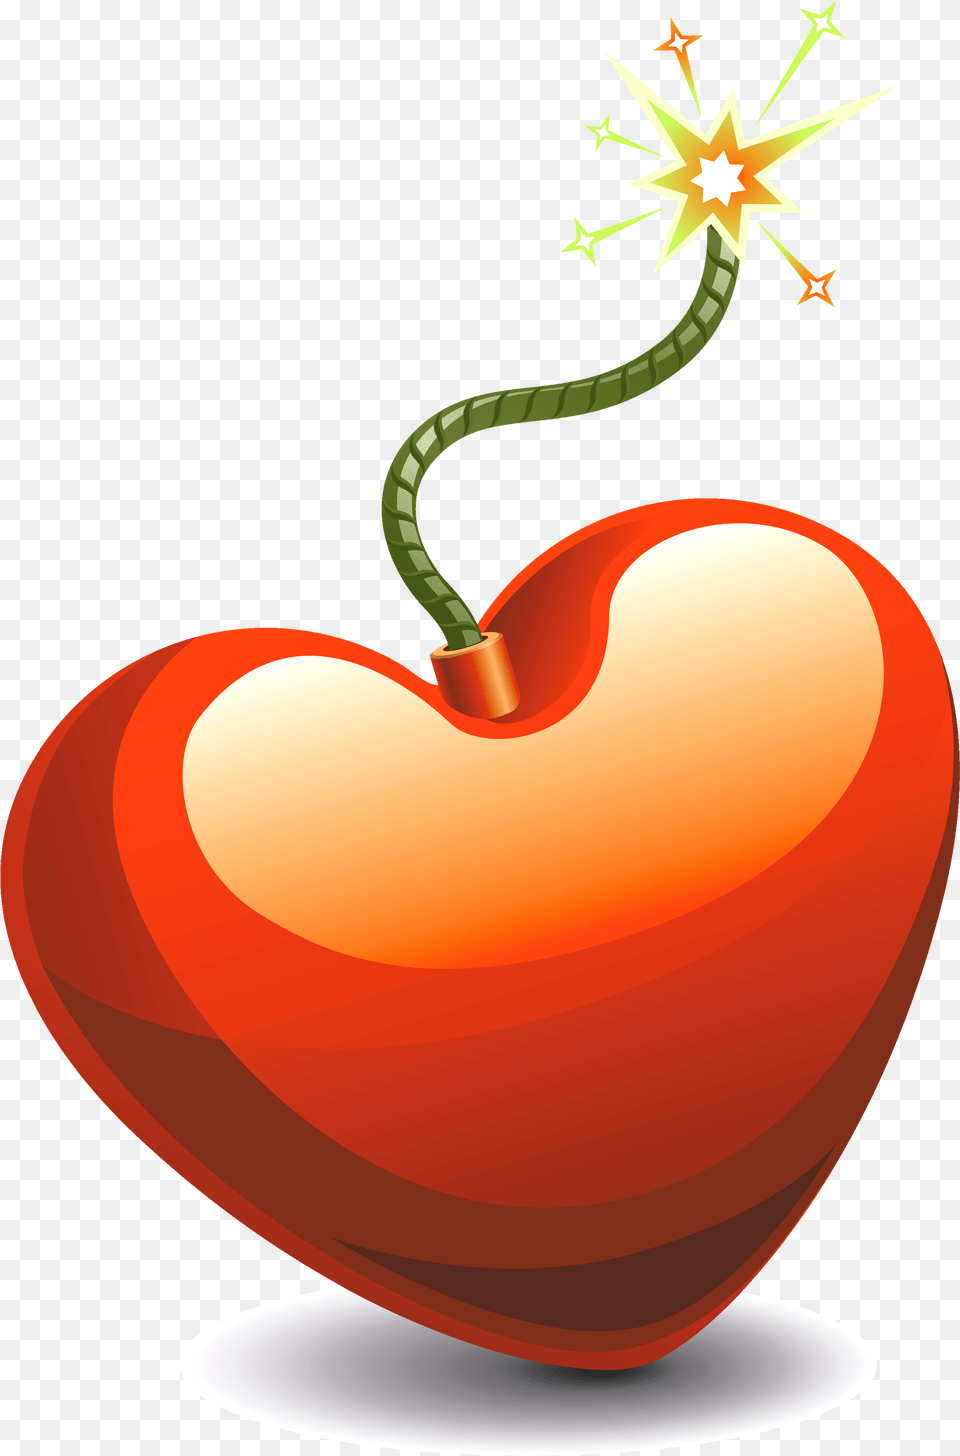 Heart Bomb Hires Copy Heart Bomb Clipart Download Bomb With Heart Clipart, Food, Fruit, Plant, Produce Png